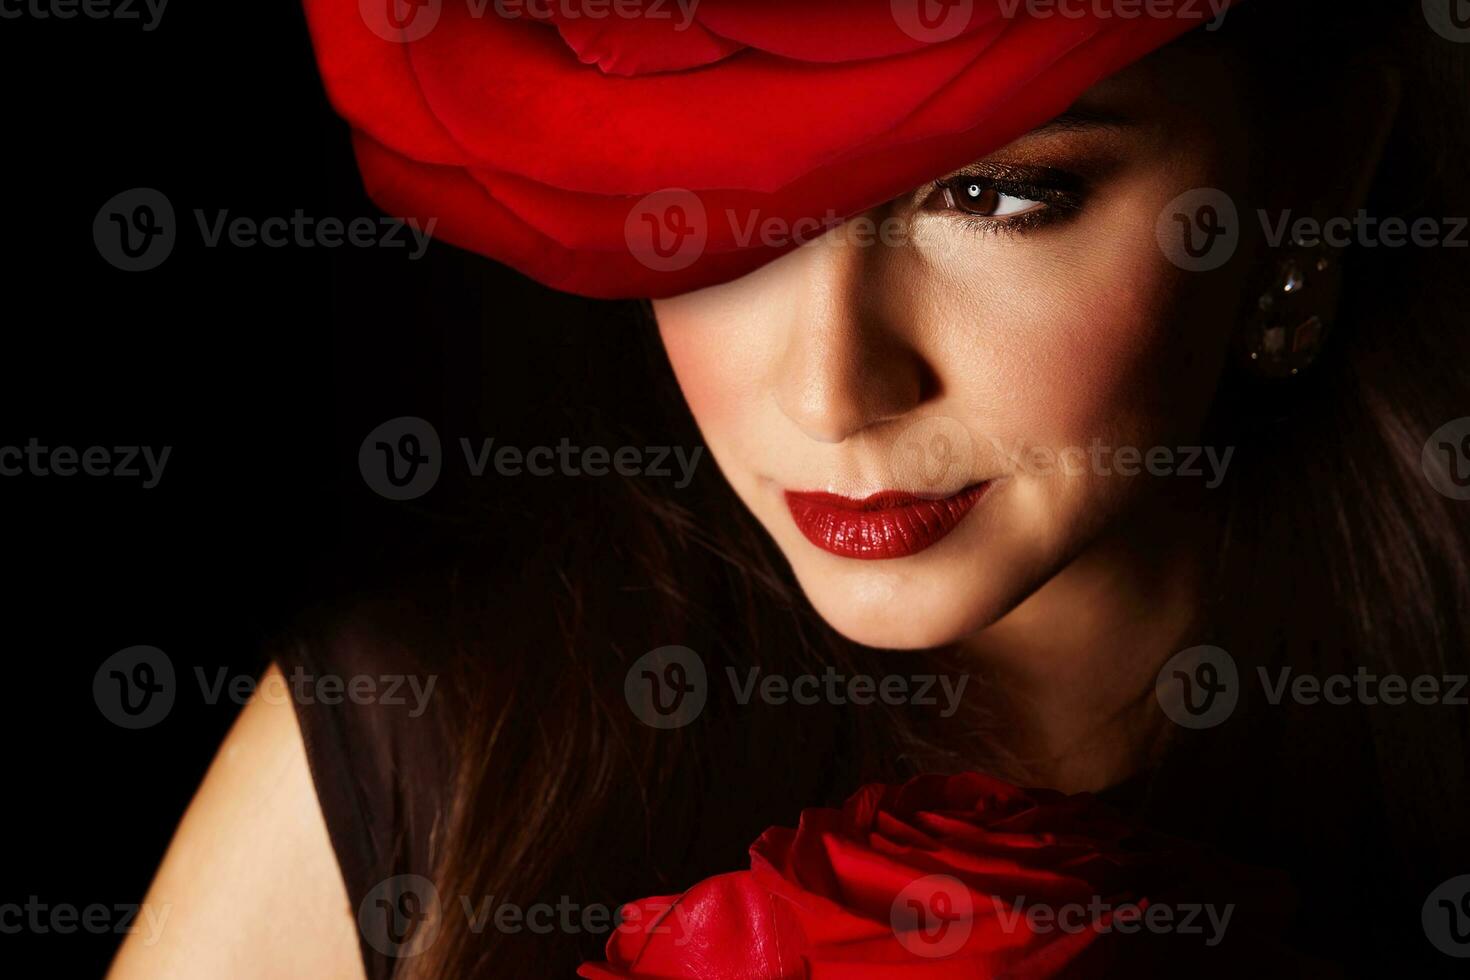 Woman with red rose photo